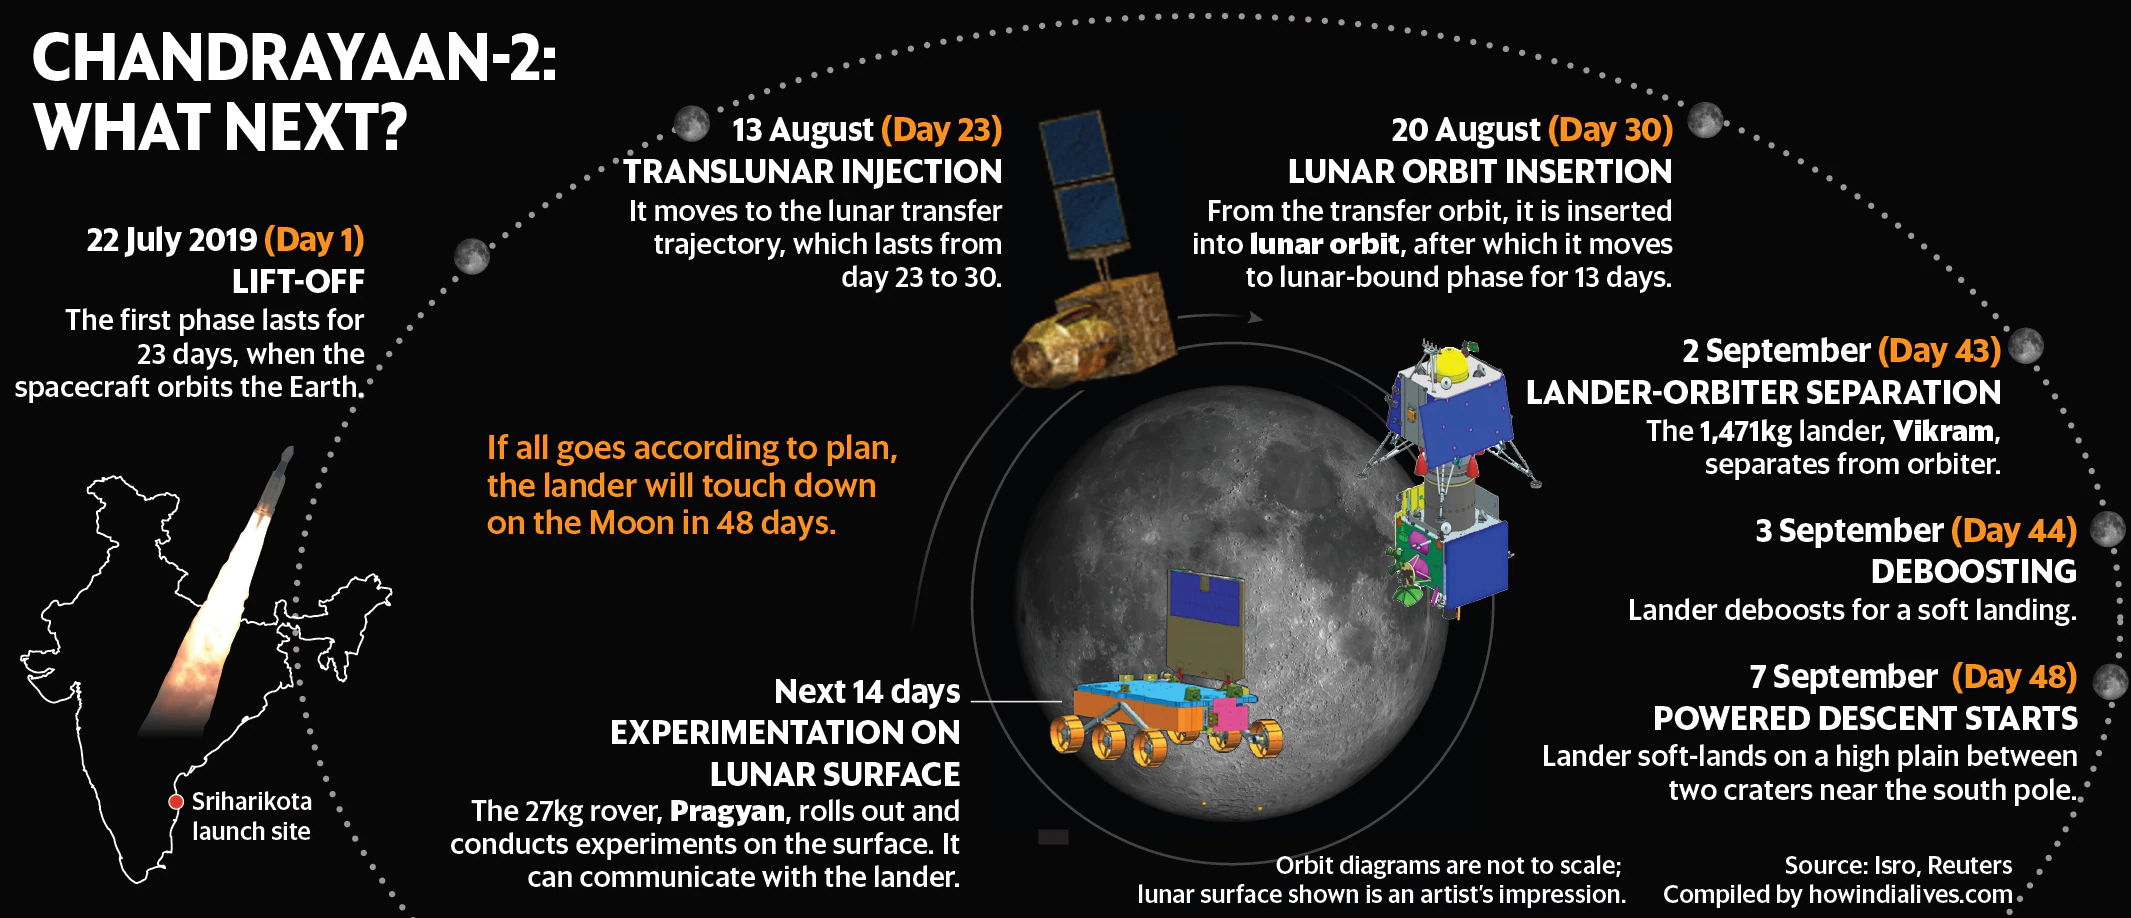 Indias New Space Mission Chandrayaan 2